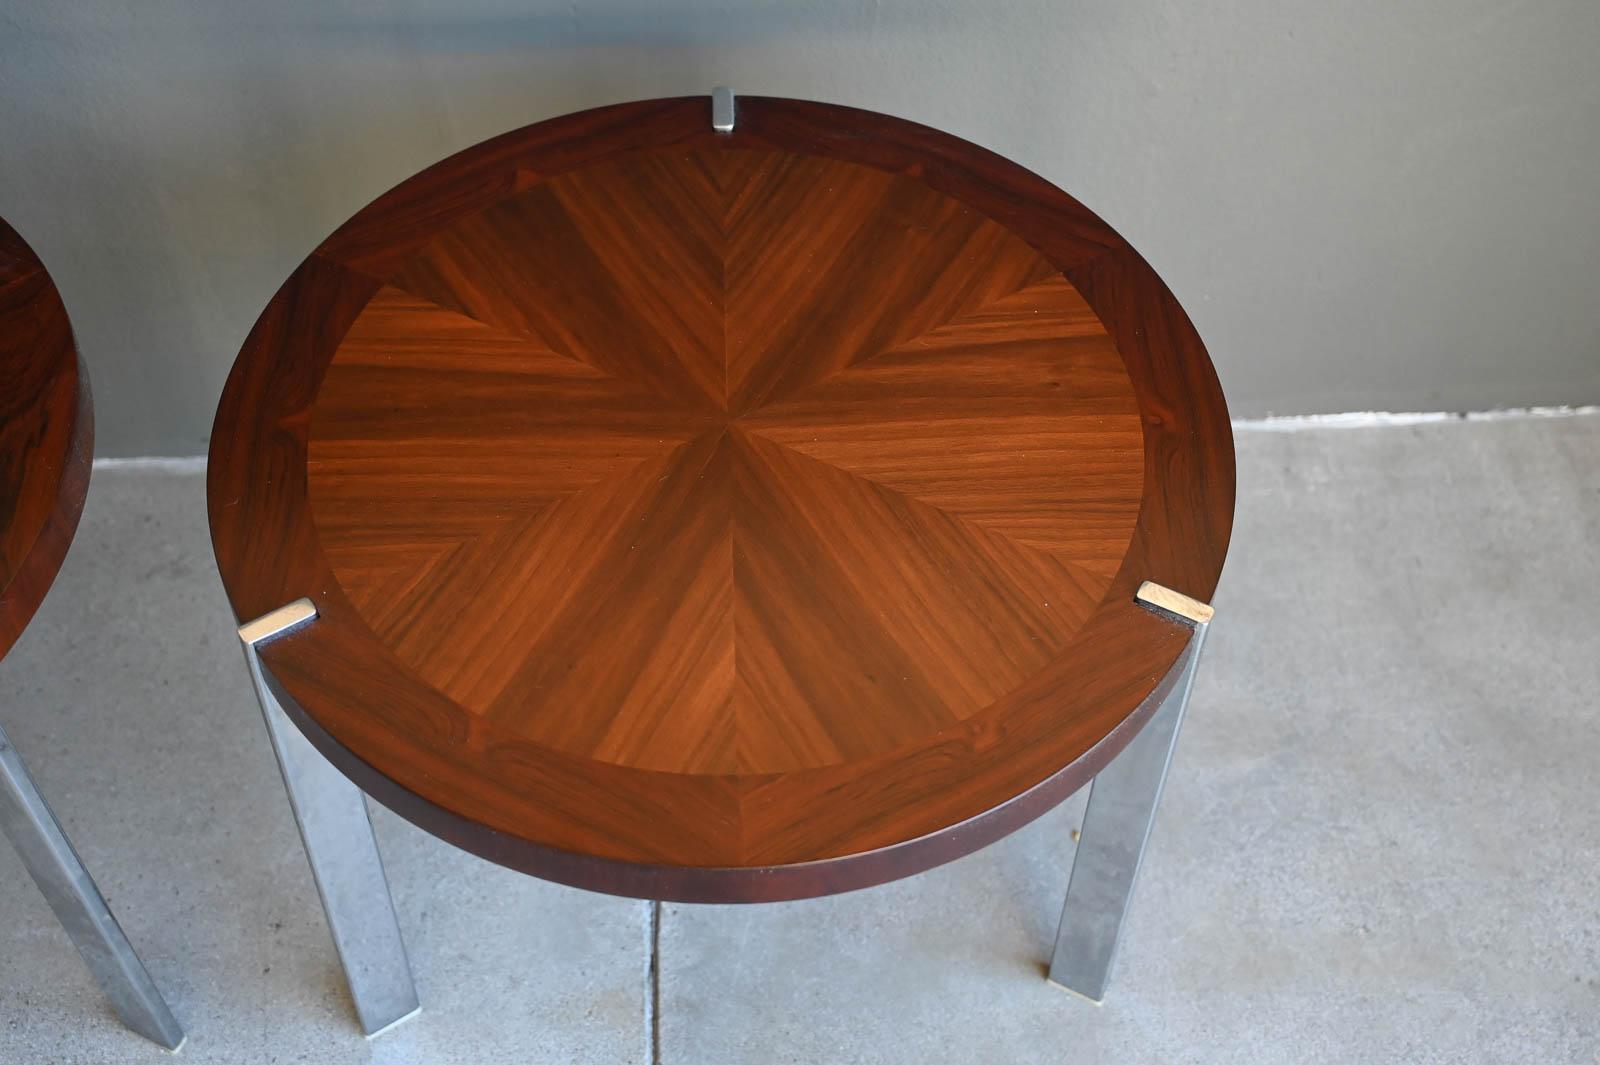 Polychromed Pair of Rosewood, Walnut and Chrome Side Tables from Lane, ca. 1965